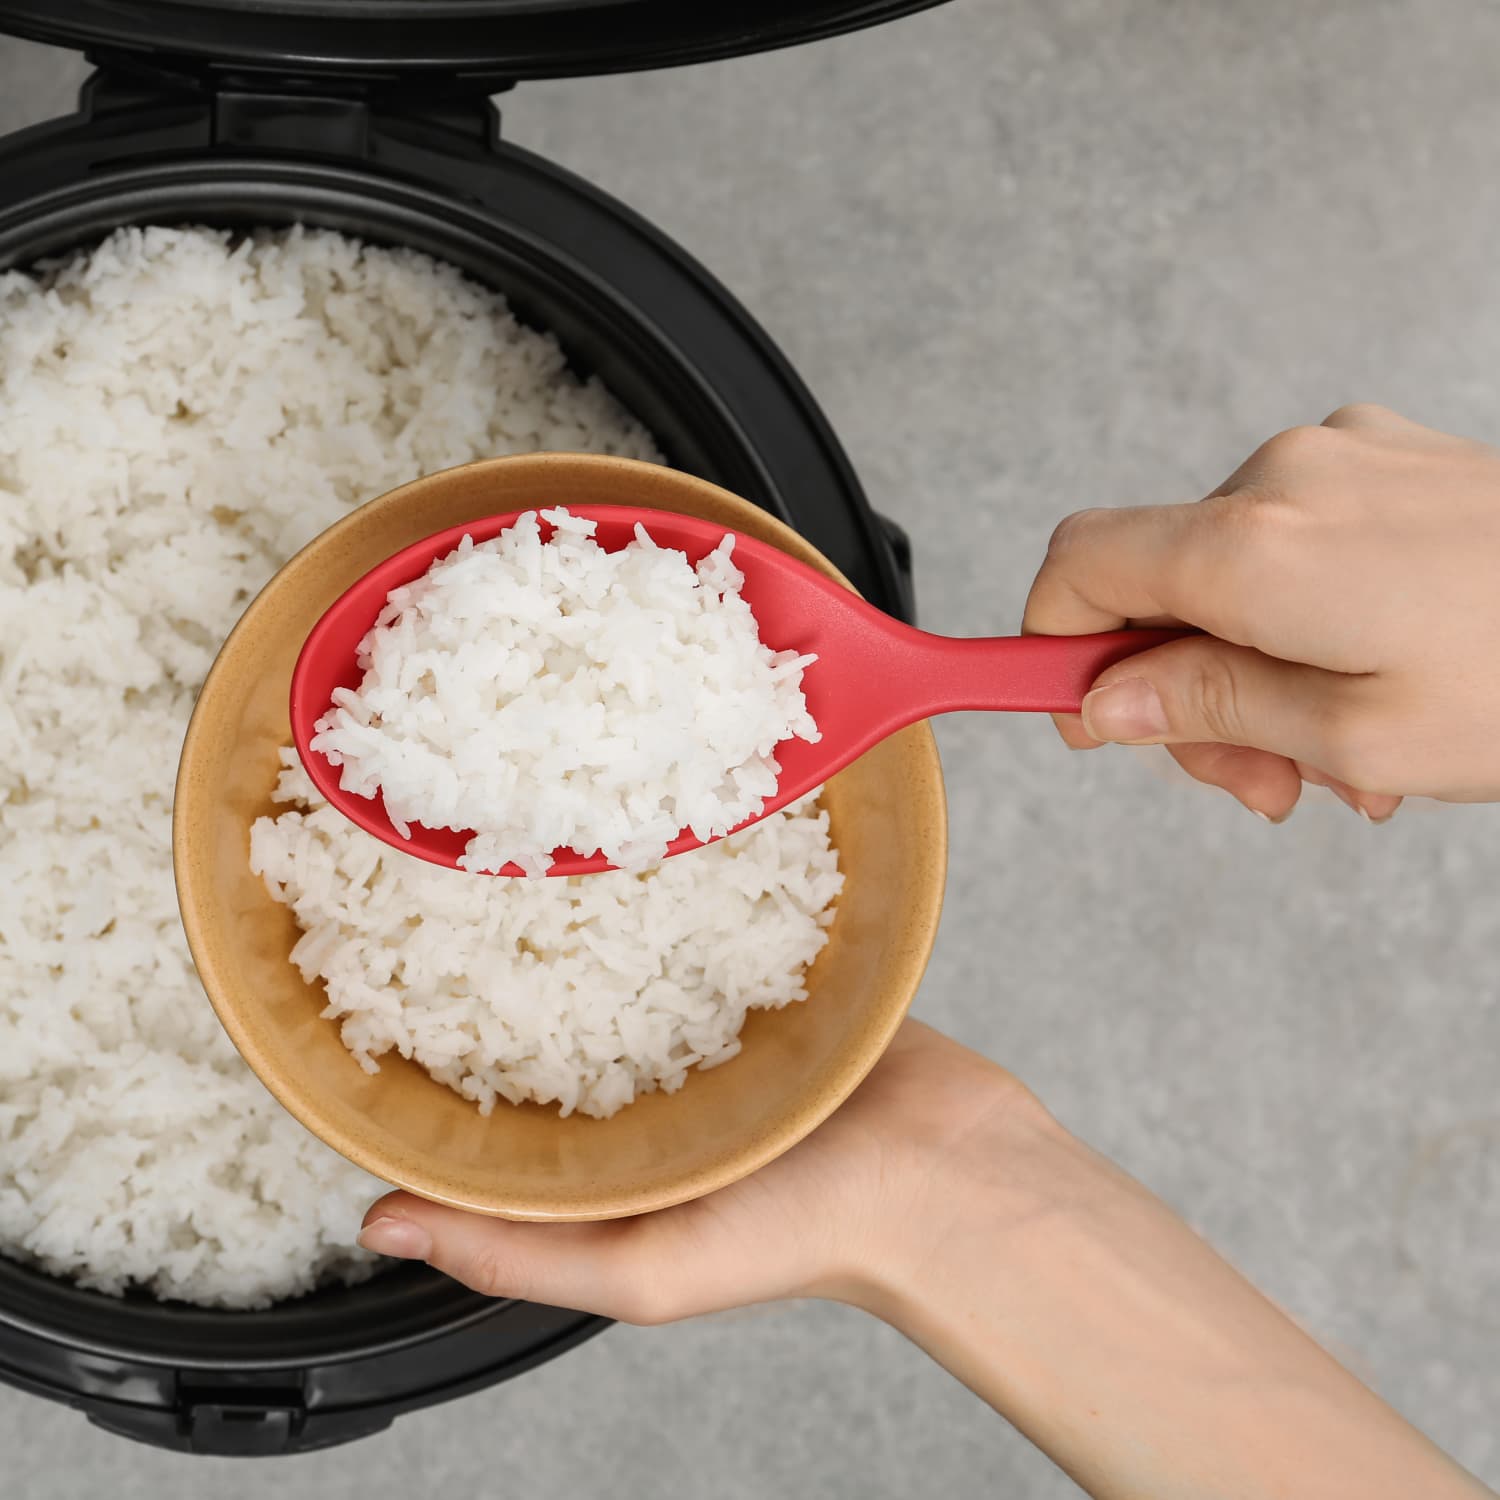 Anyone have this Aroma slow cooker/rice cooker combo? I just picked it up  from Costco but a bit apprehensive on how well it works. : r/slowcooking